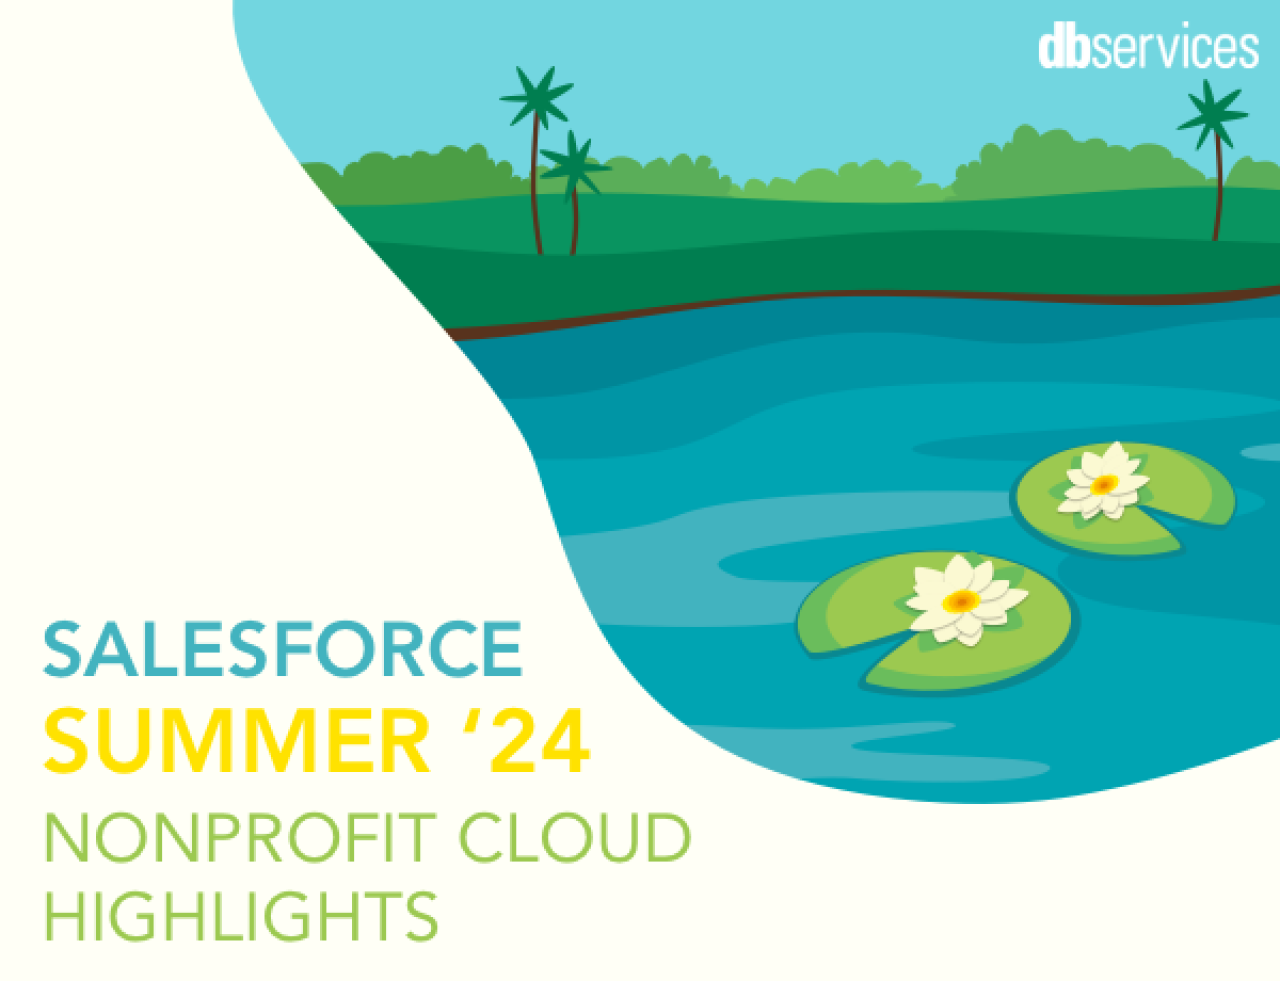 salesforce summer 24 nonprofit cloud release highlights db services.